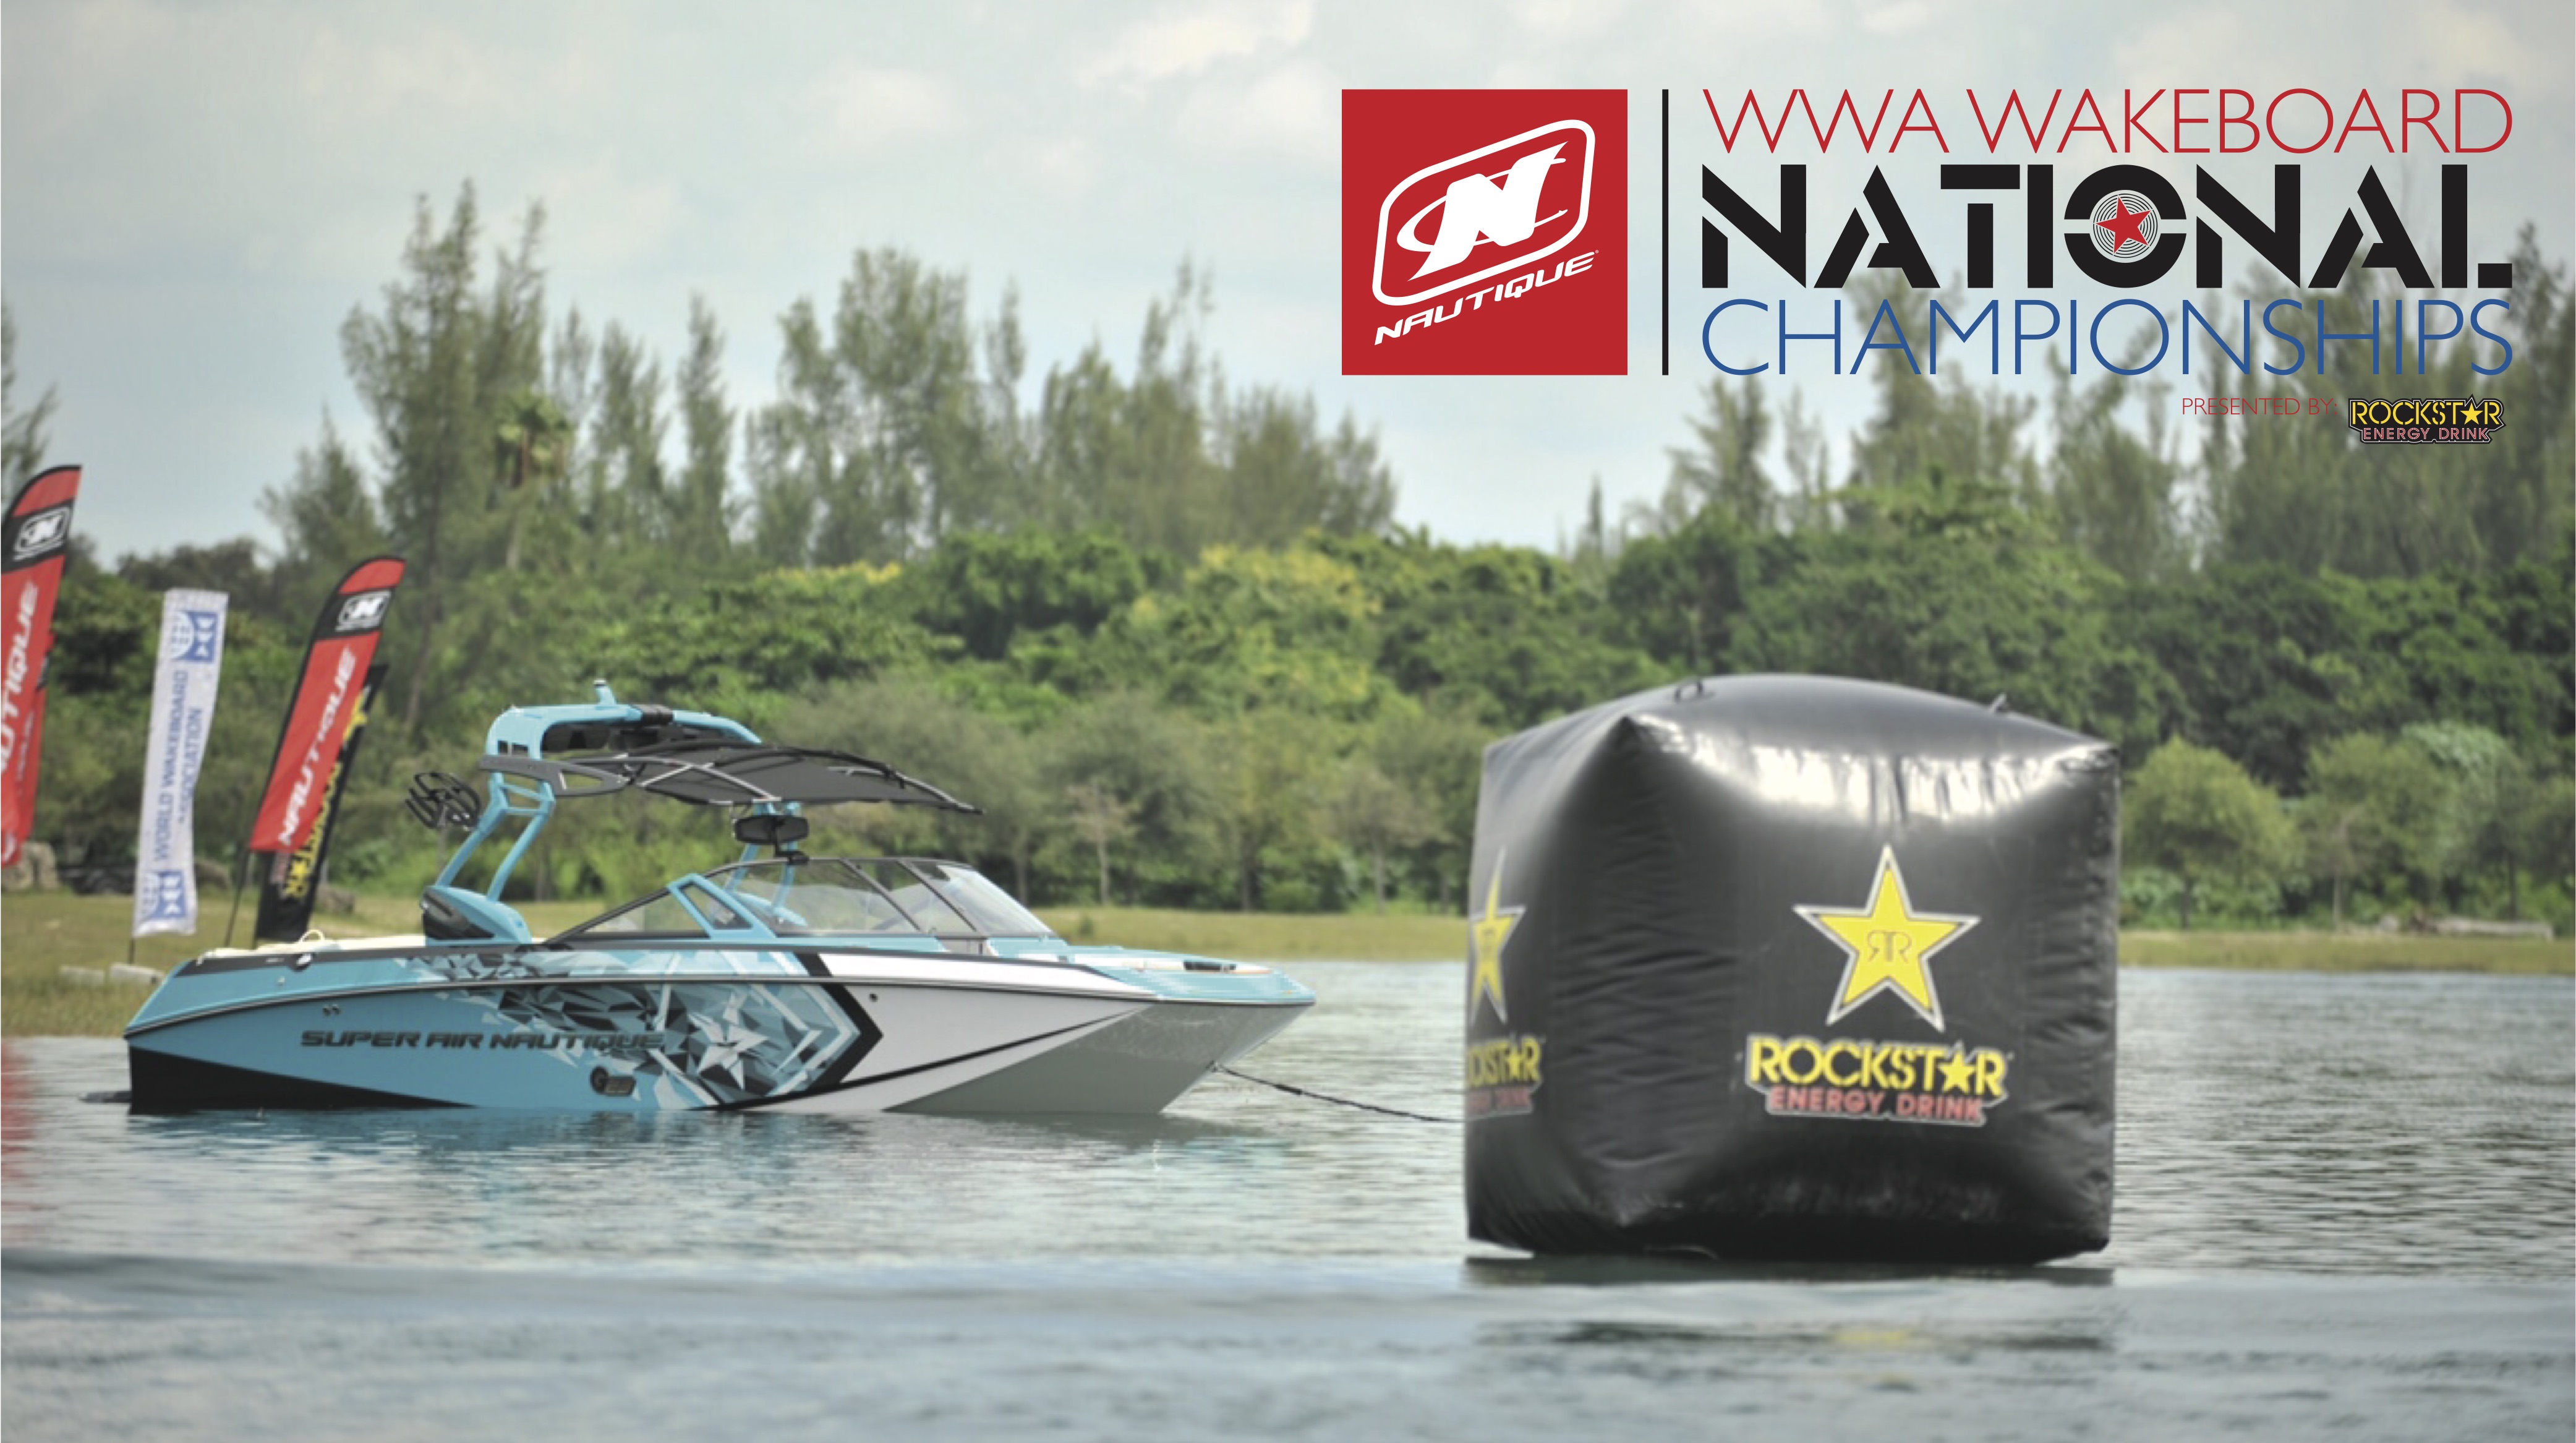 National Champions Crowned at Nautique WWA National Wakeboard Championships in Miami